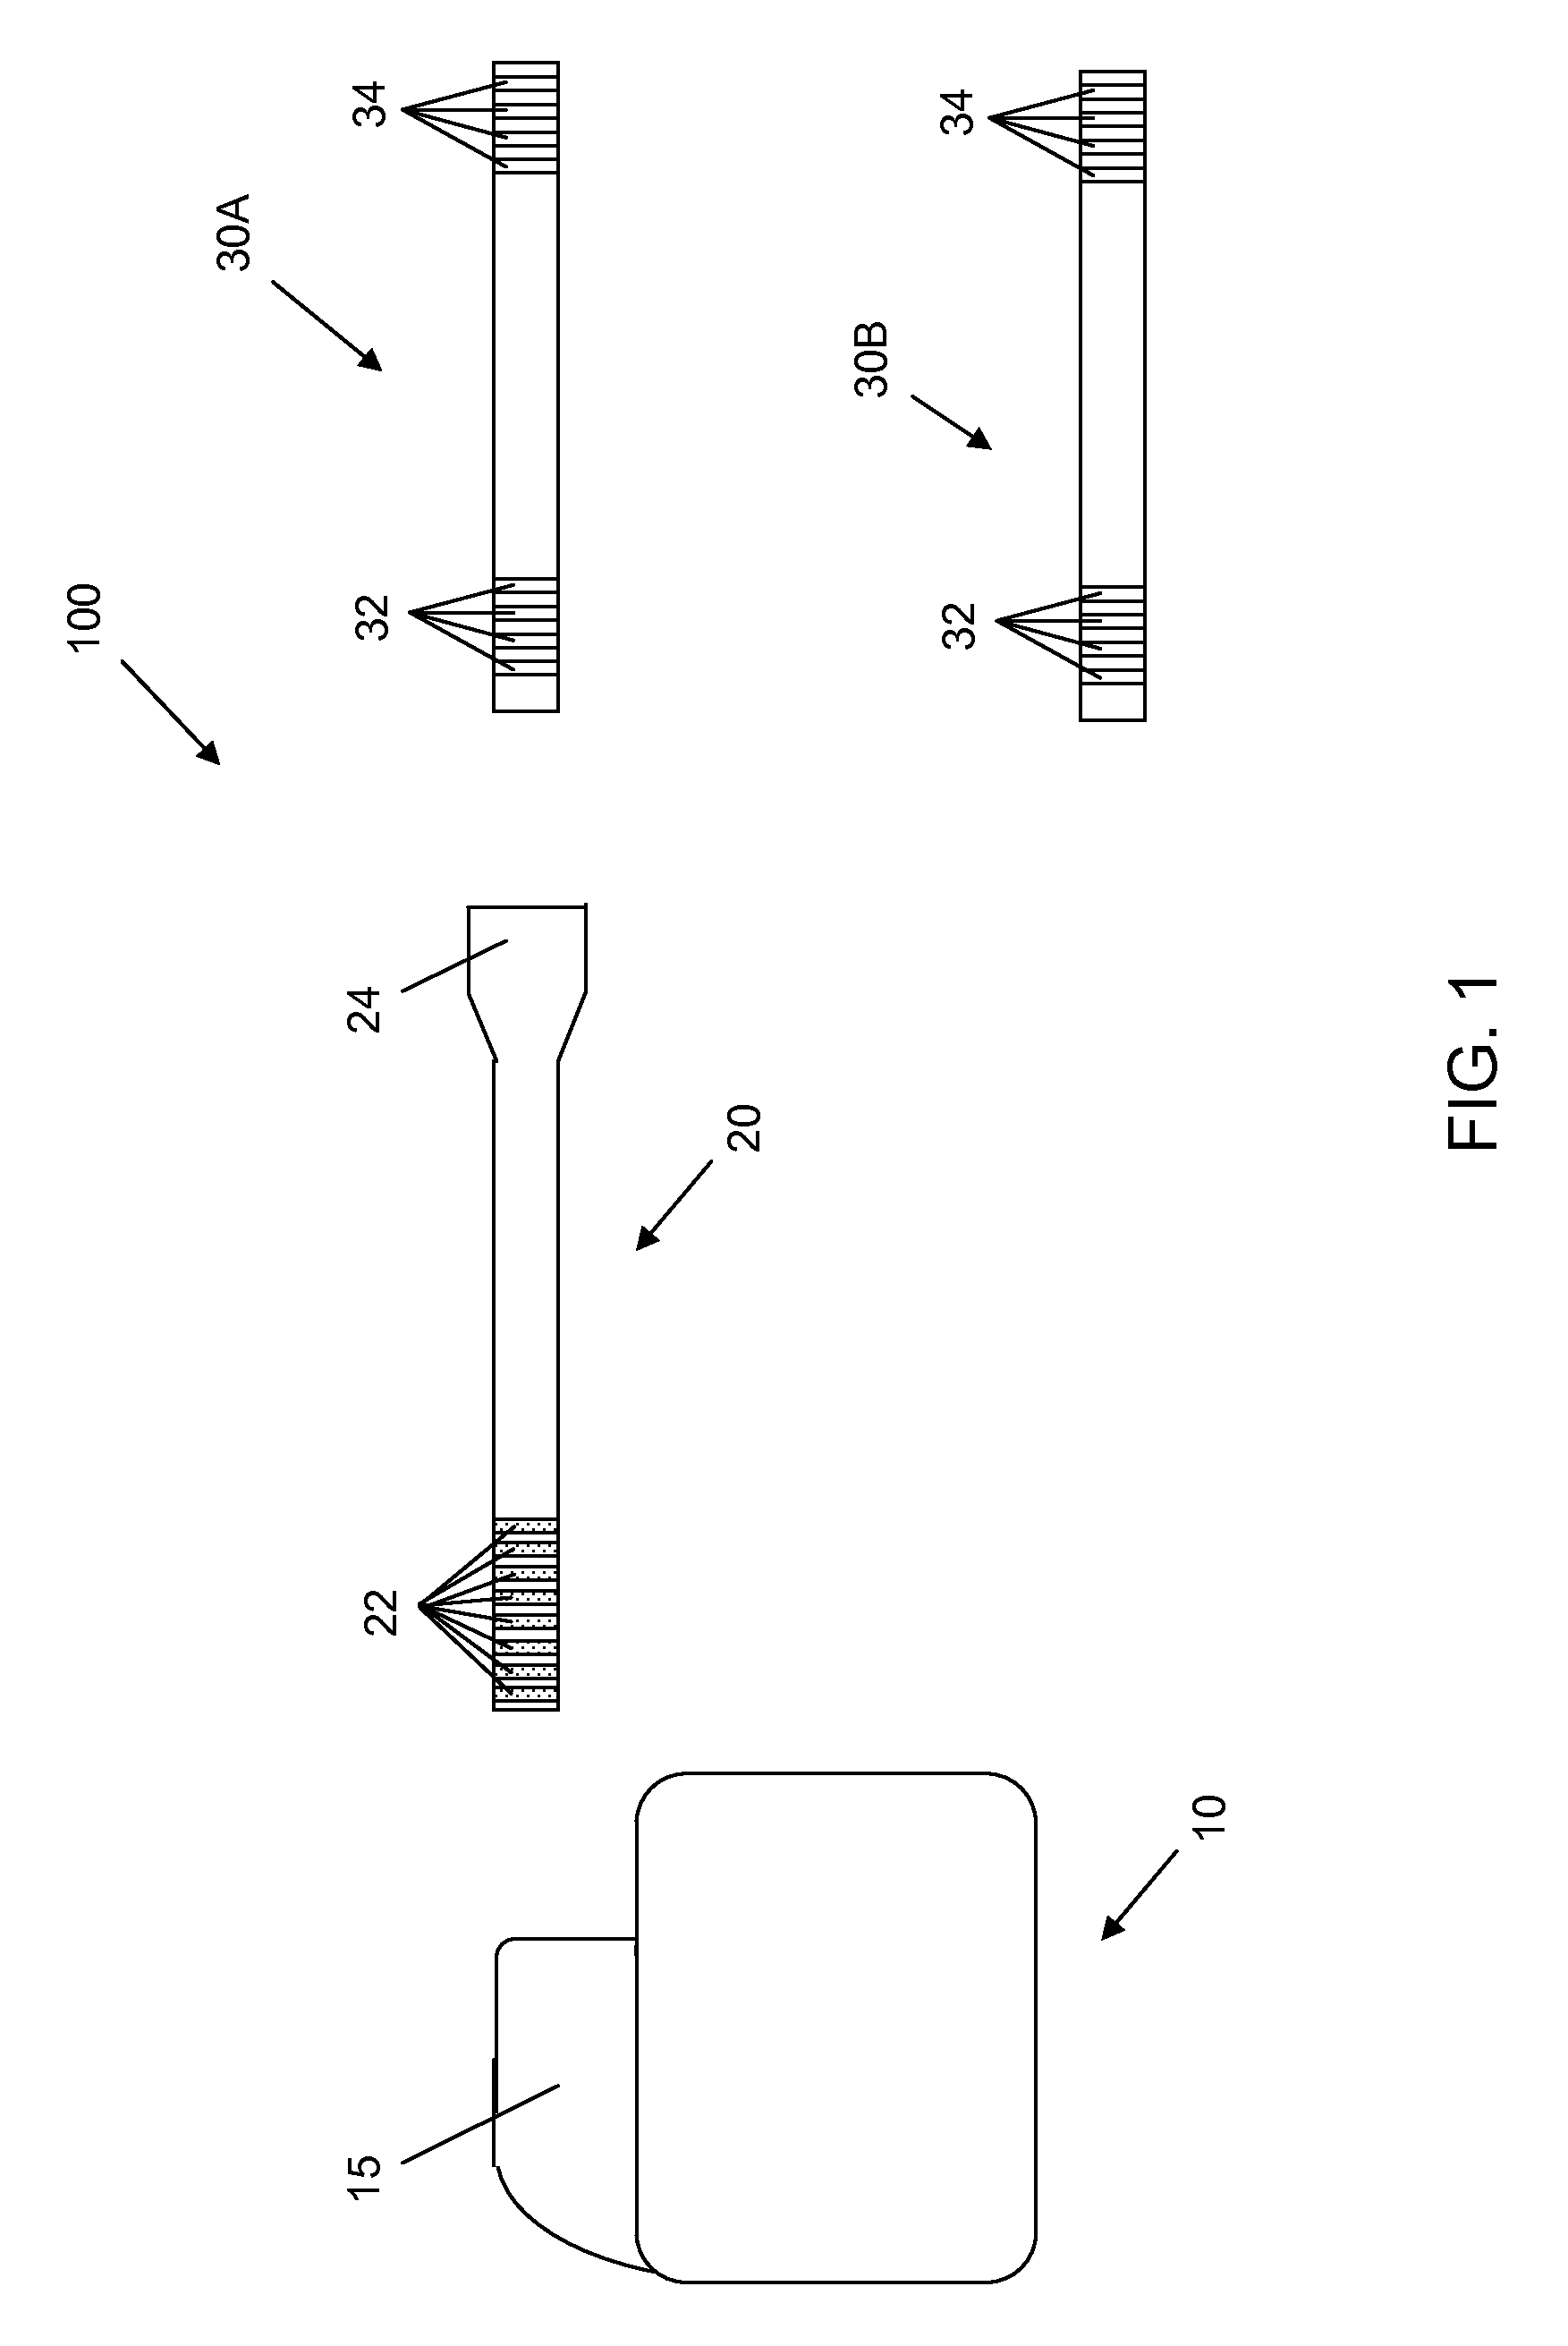 Lead extension having connector configured to receive two leads